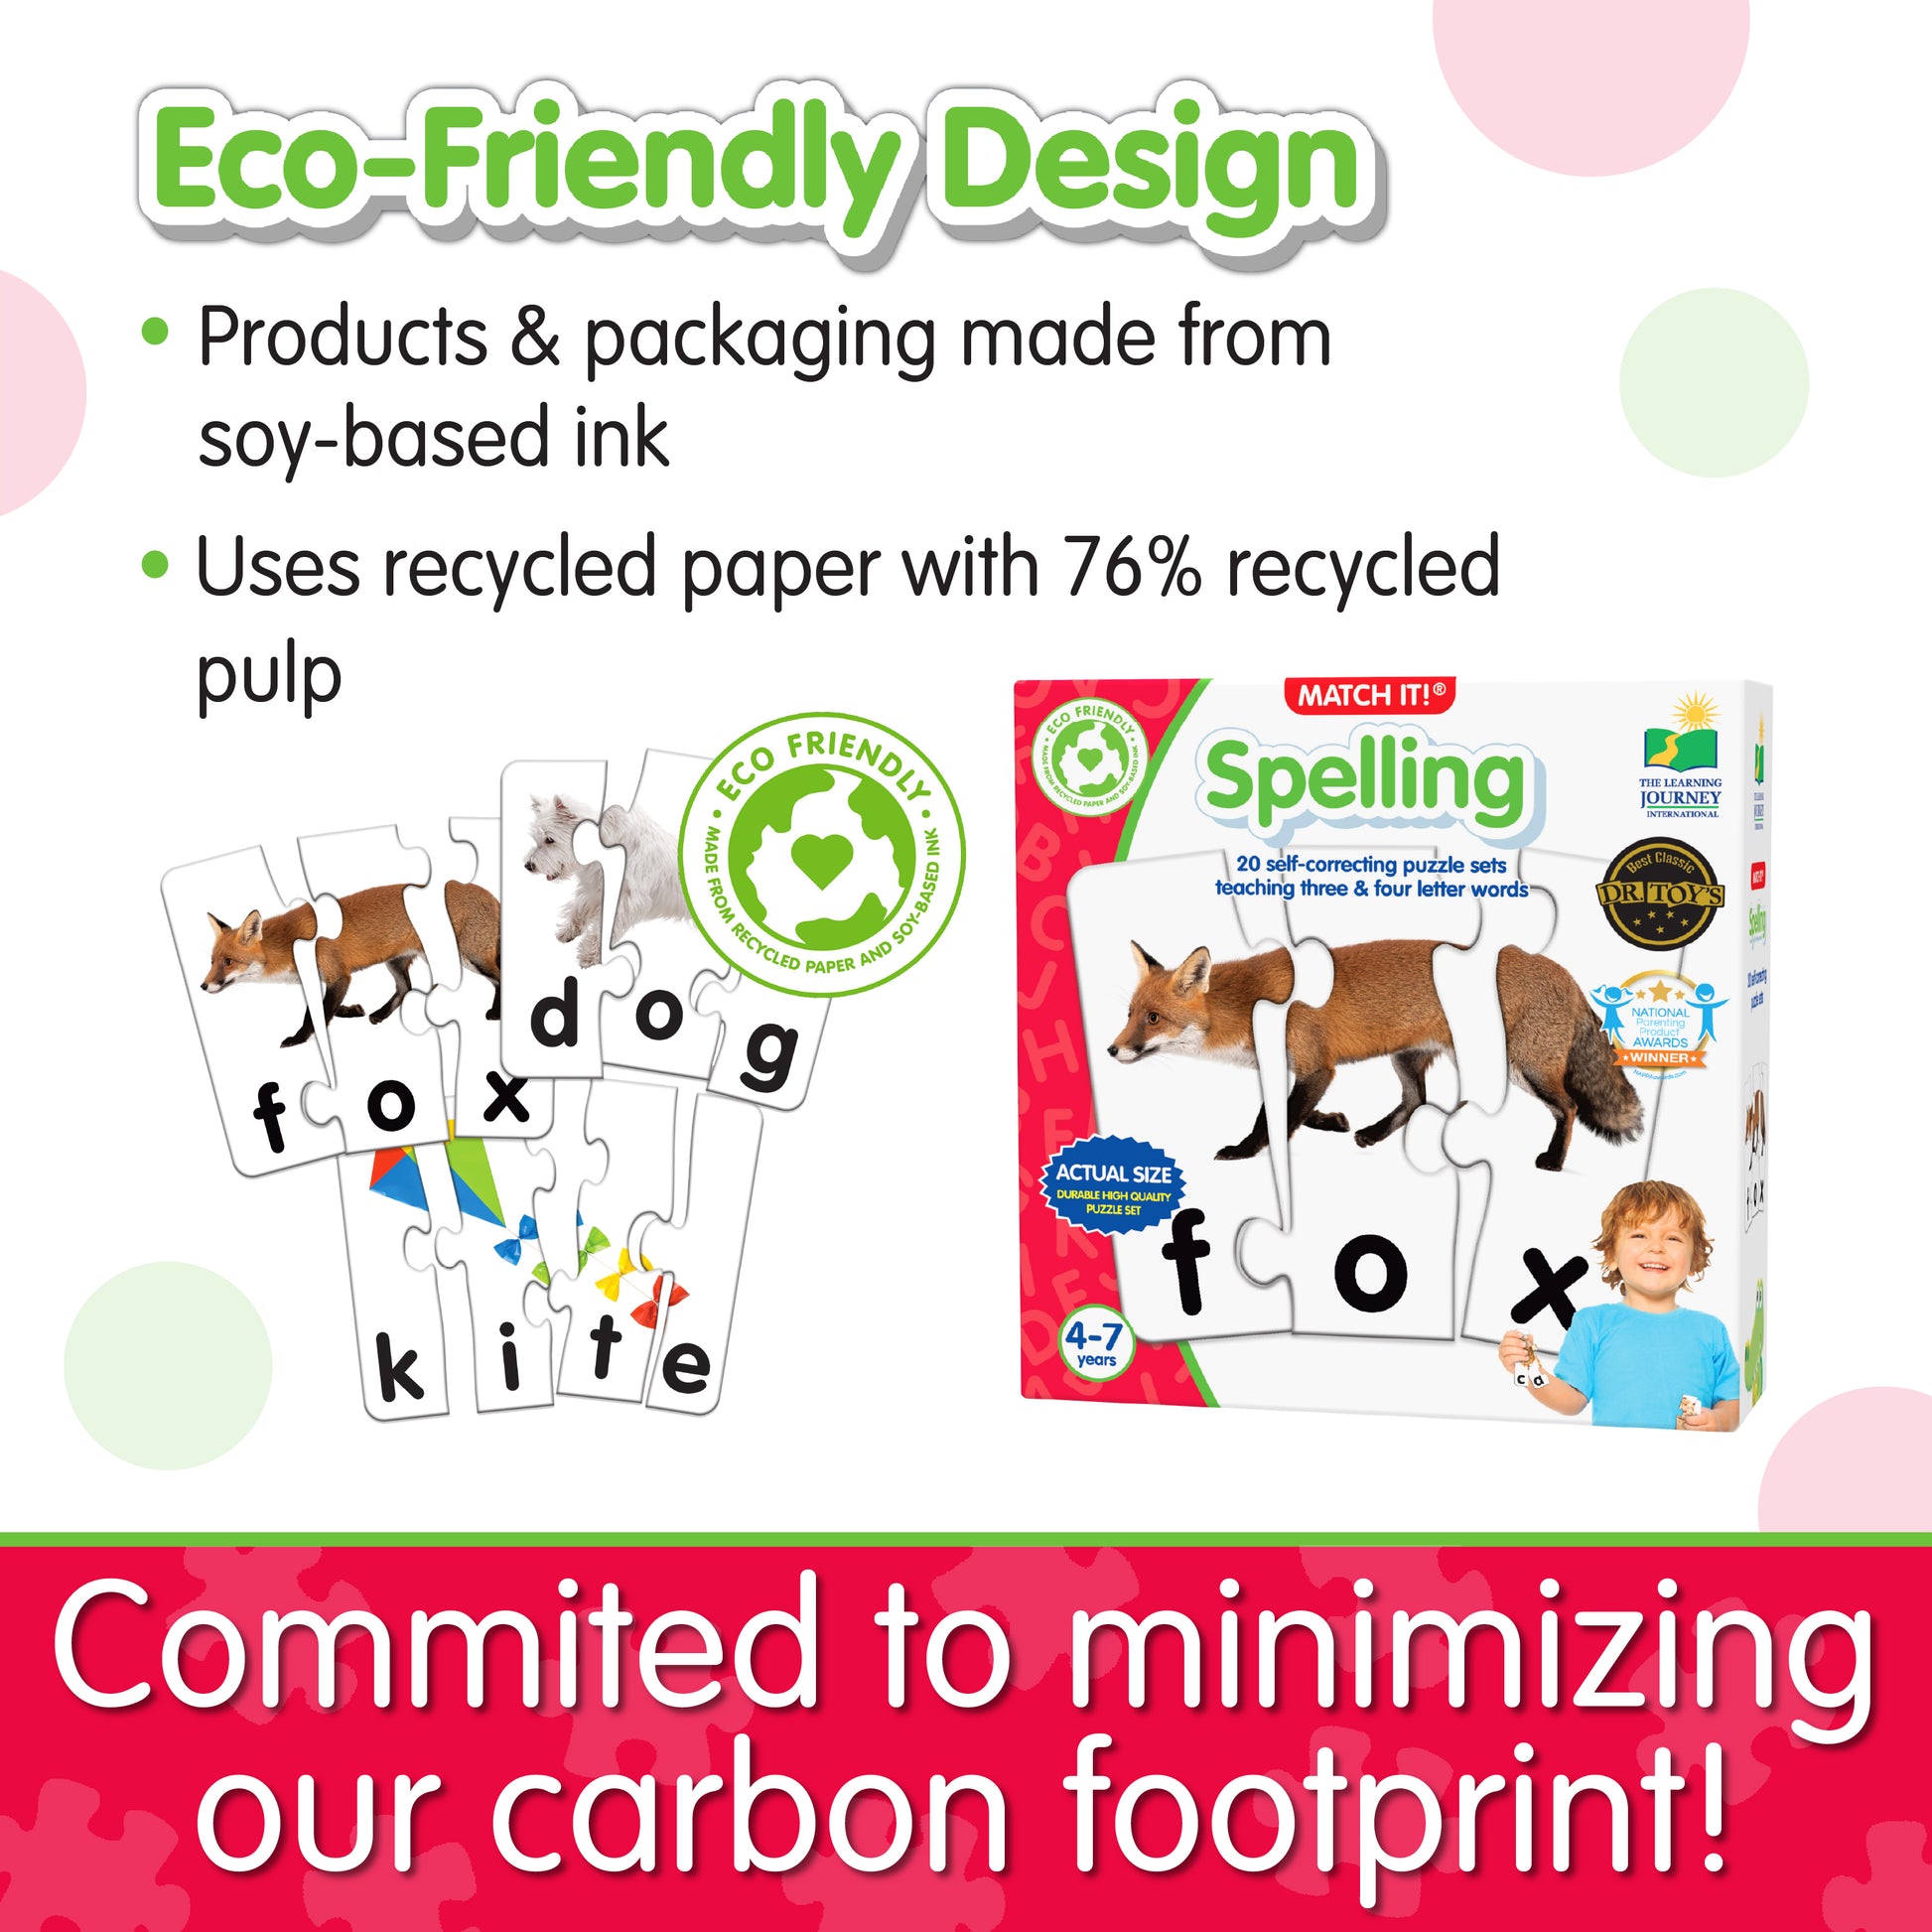 Infographic about Match It - Spelling's eco-friendly design that says, "Committed to minimizing our carbon footprint!"